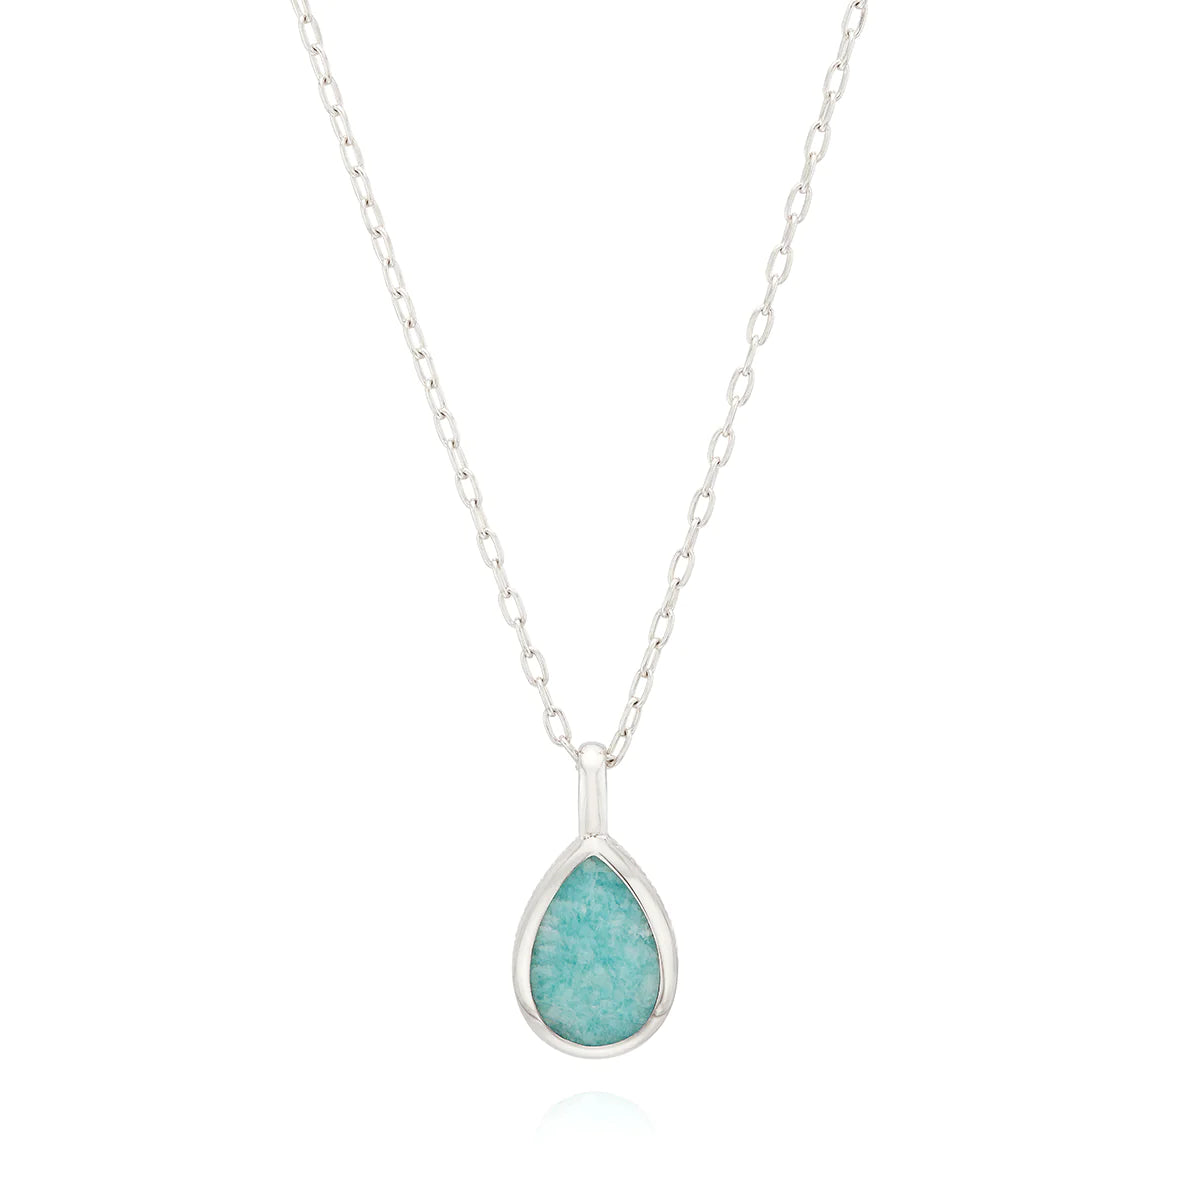 Silver and Amazonite teardrop pendant necklace